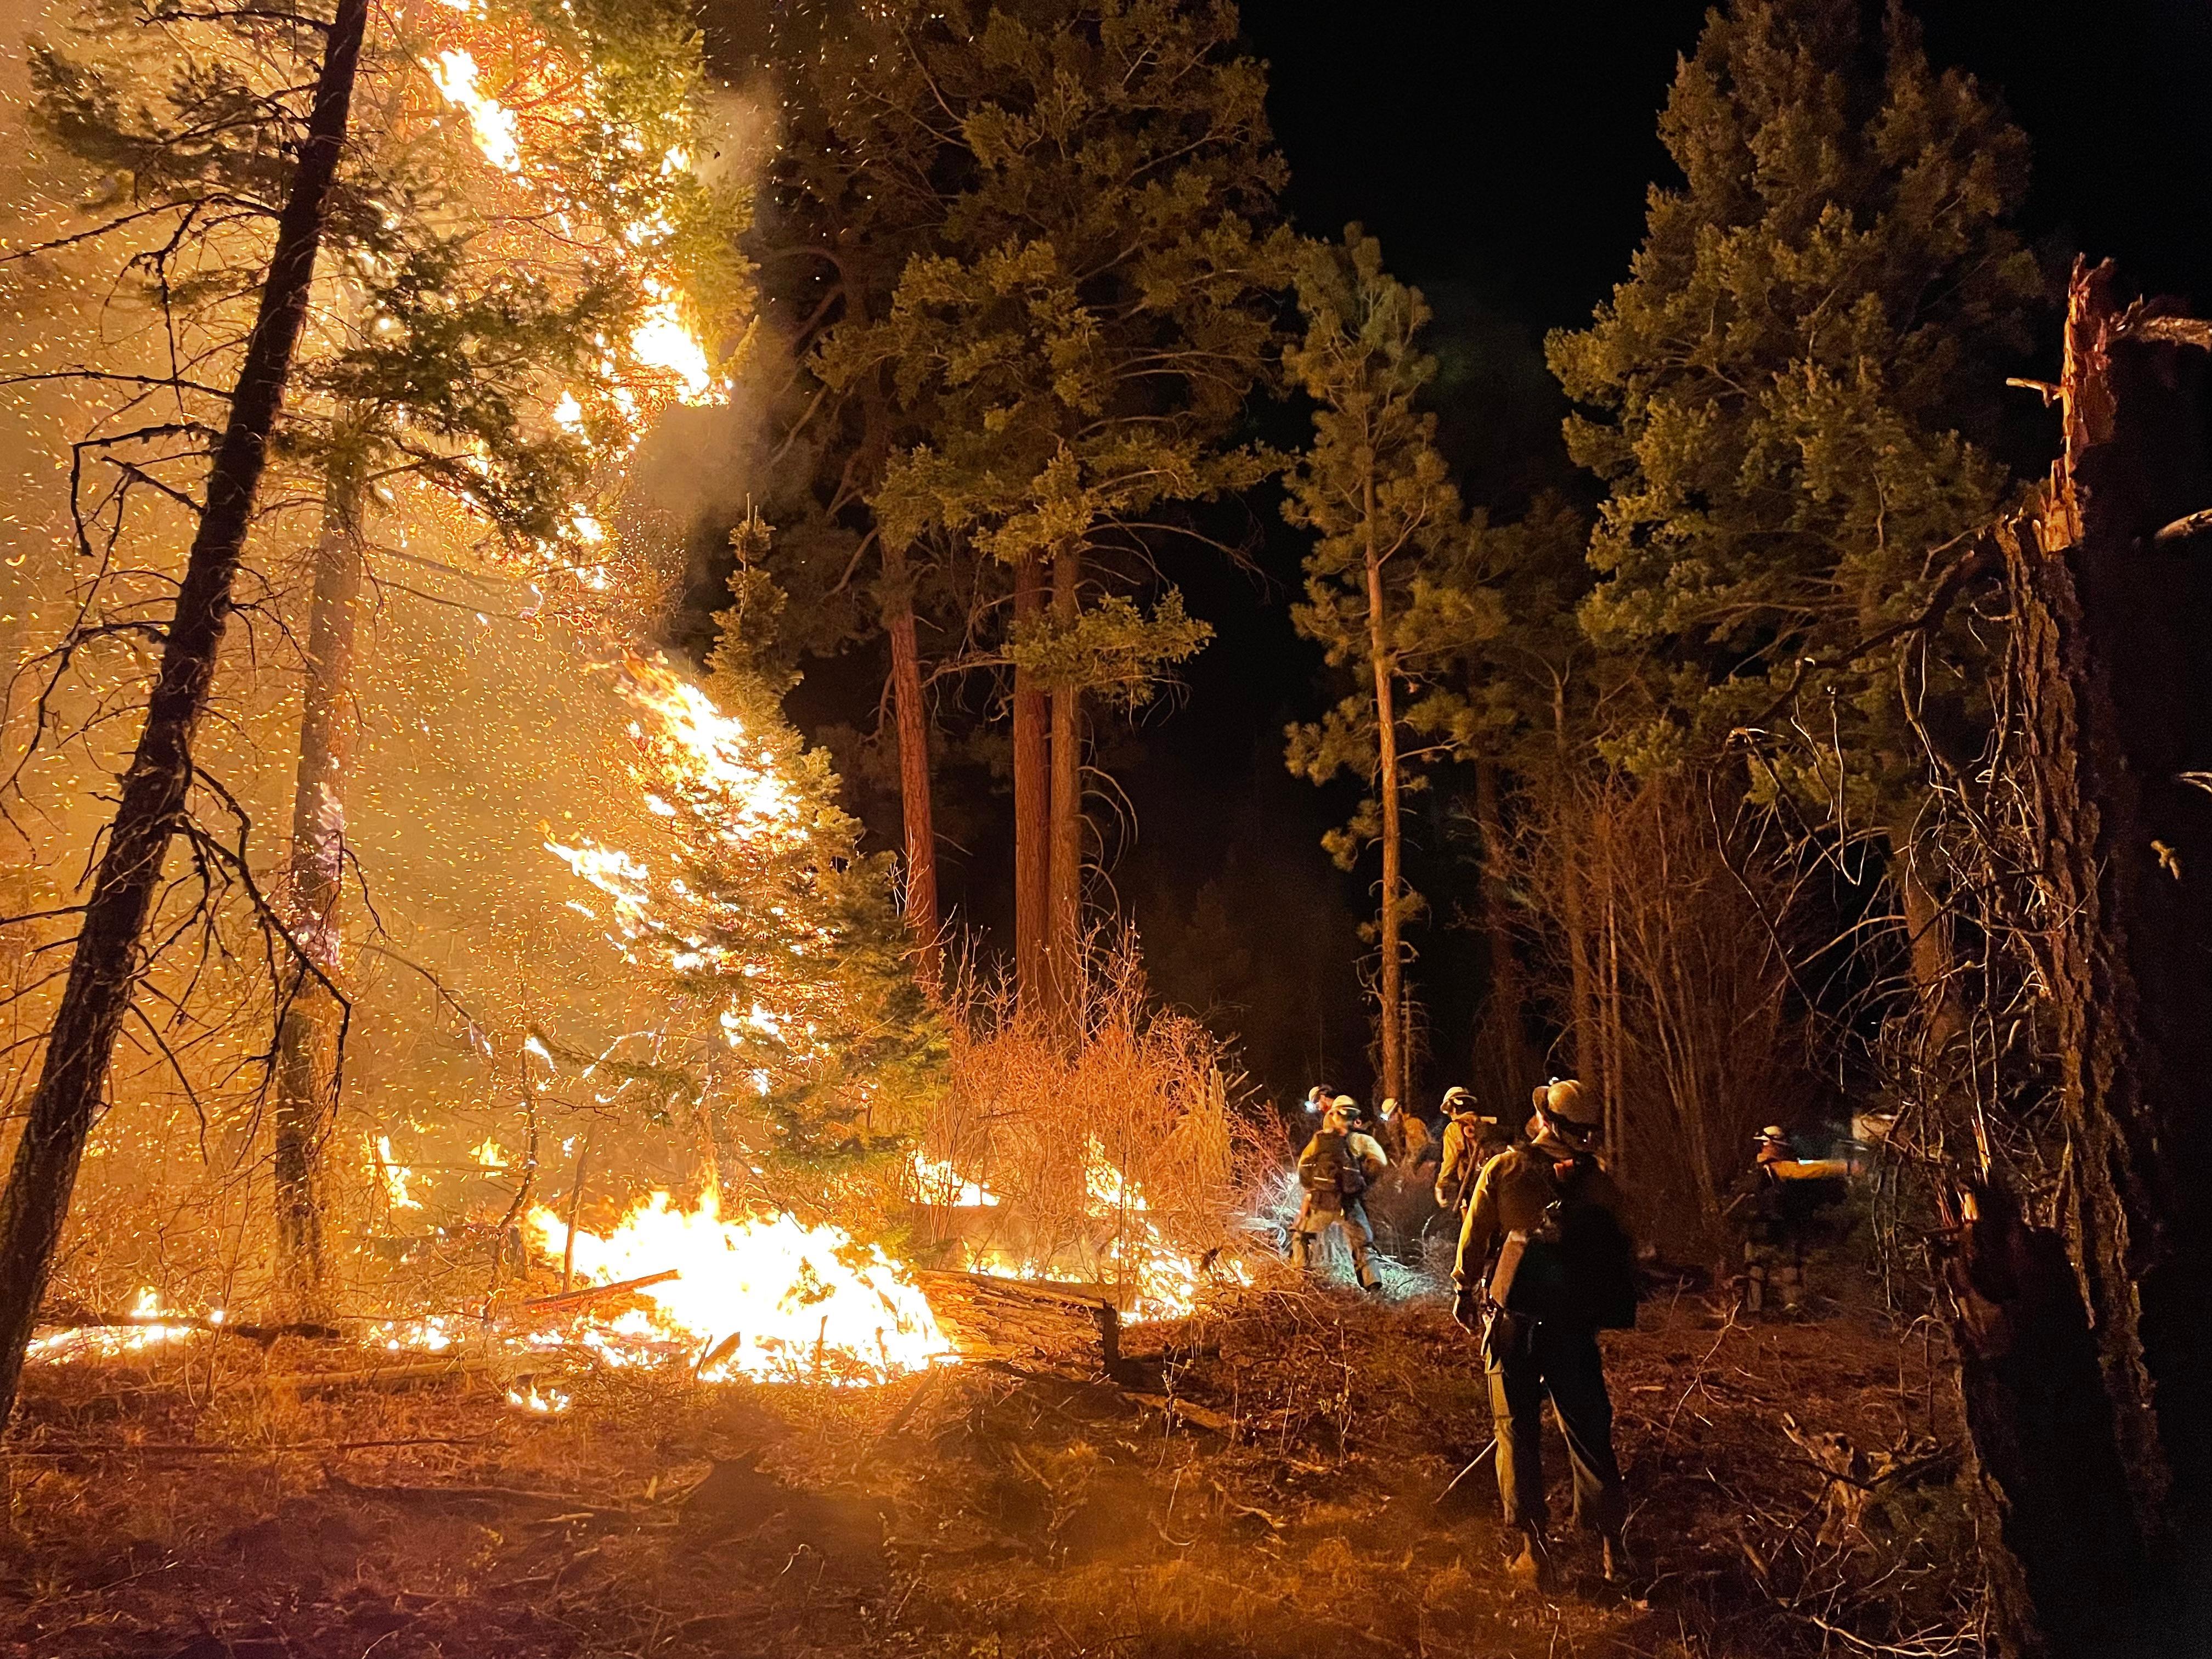 These photos are from a very busy Lone Peak Hotshot crew who've been working on the night shift.